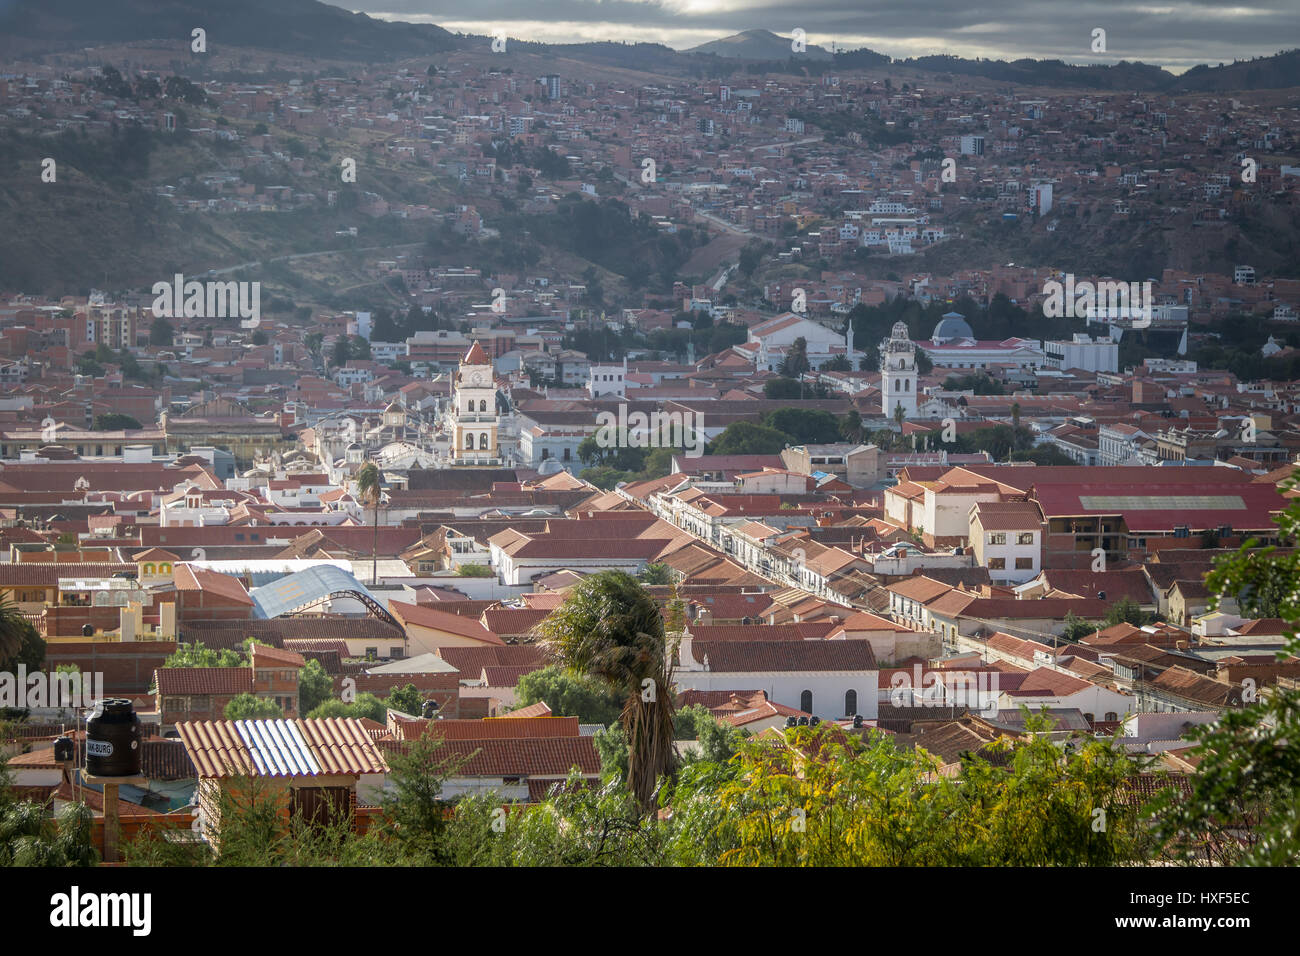 High view of city of Sucre, Bolivia Stock Photo